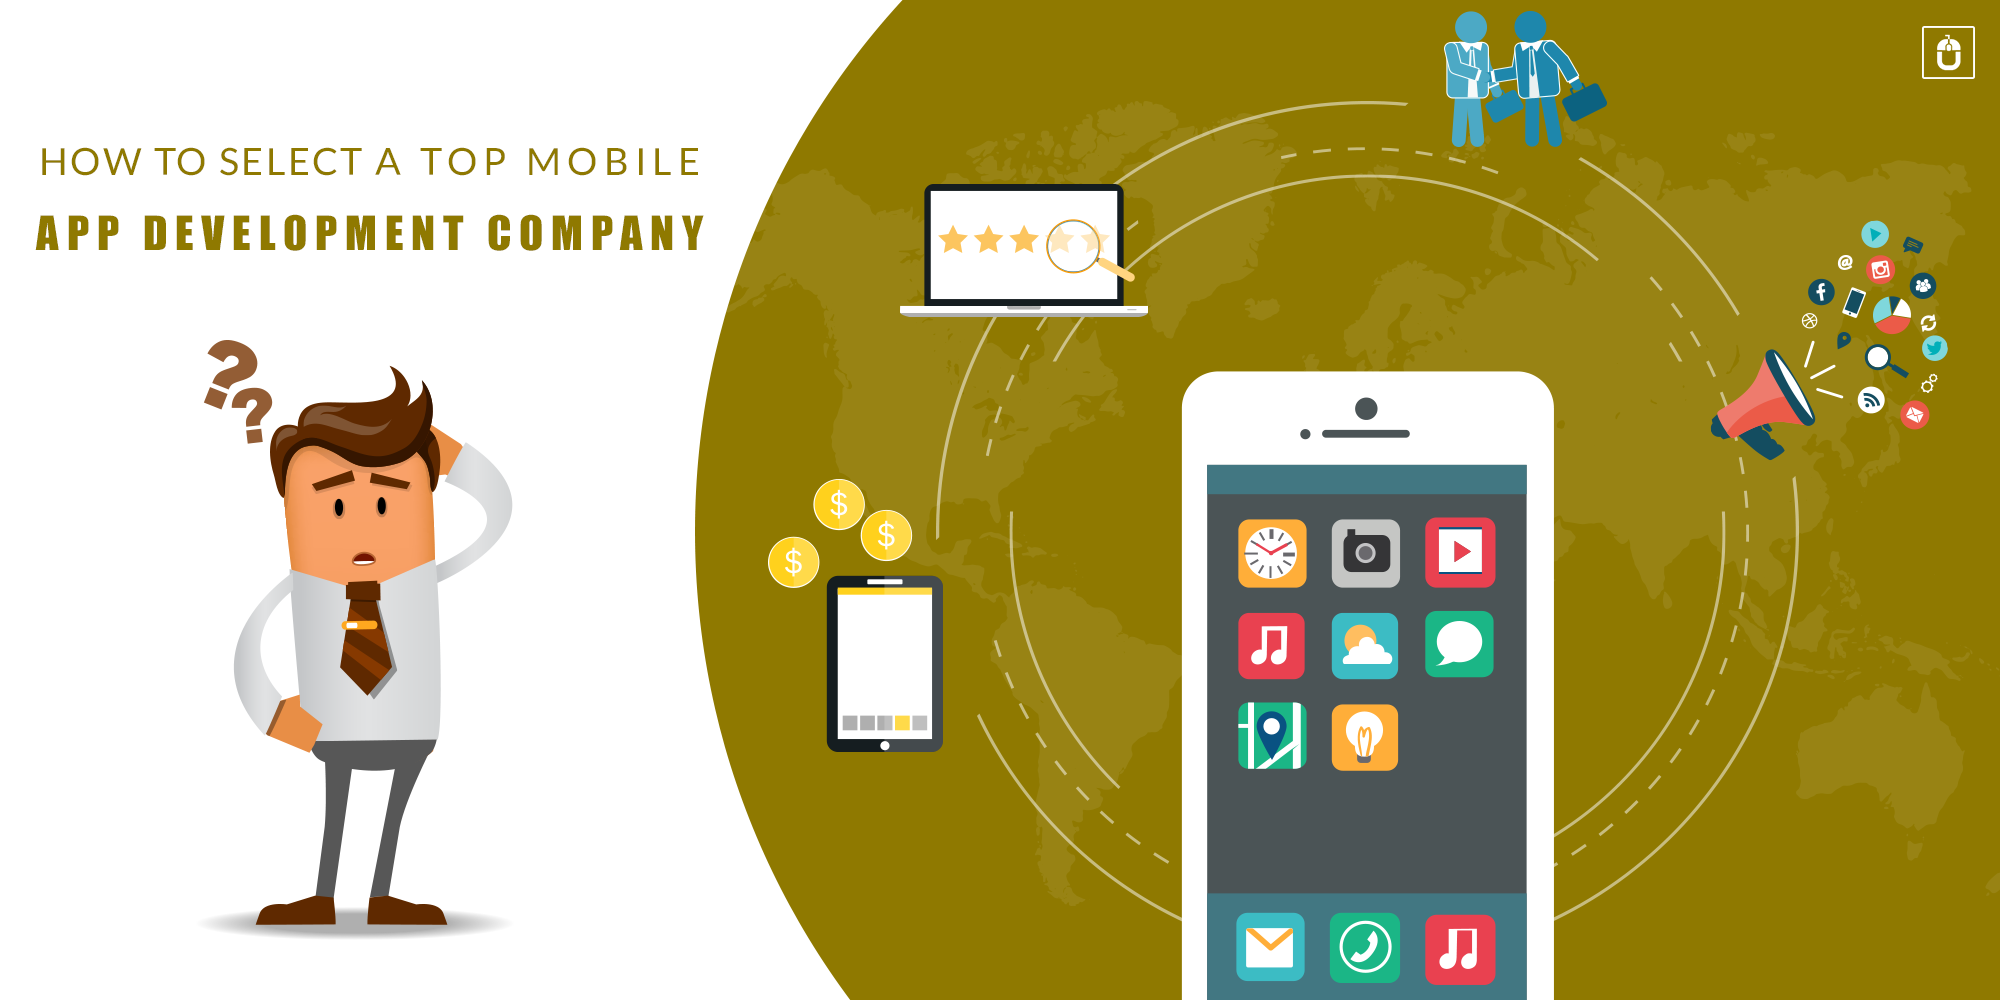 FACTS YOU SHOULD NOT OVERLOOK WHILE SELECTING A TOP MOBILE APP DEVELOPMENT COMPANY (UPDATED)